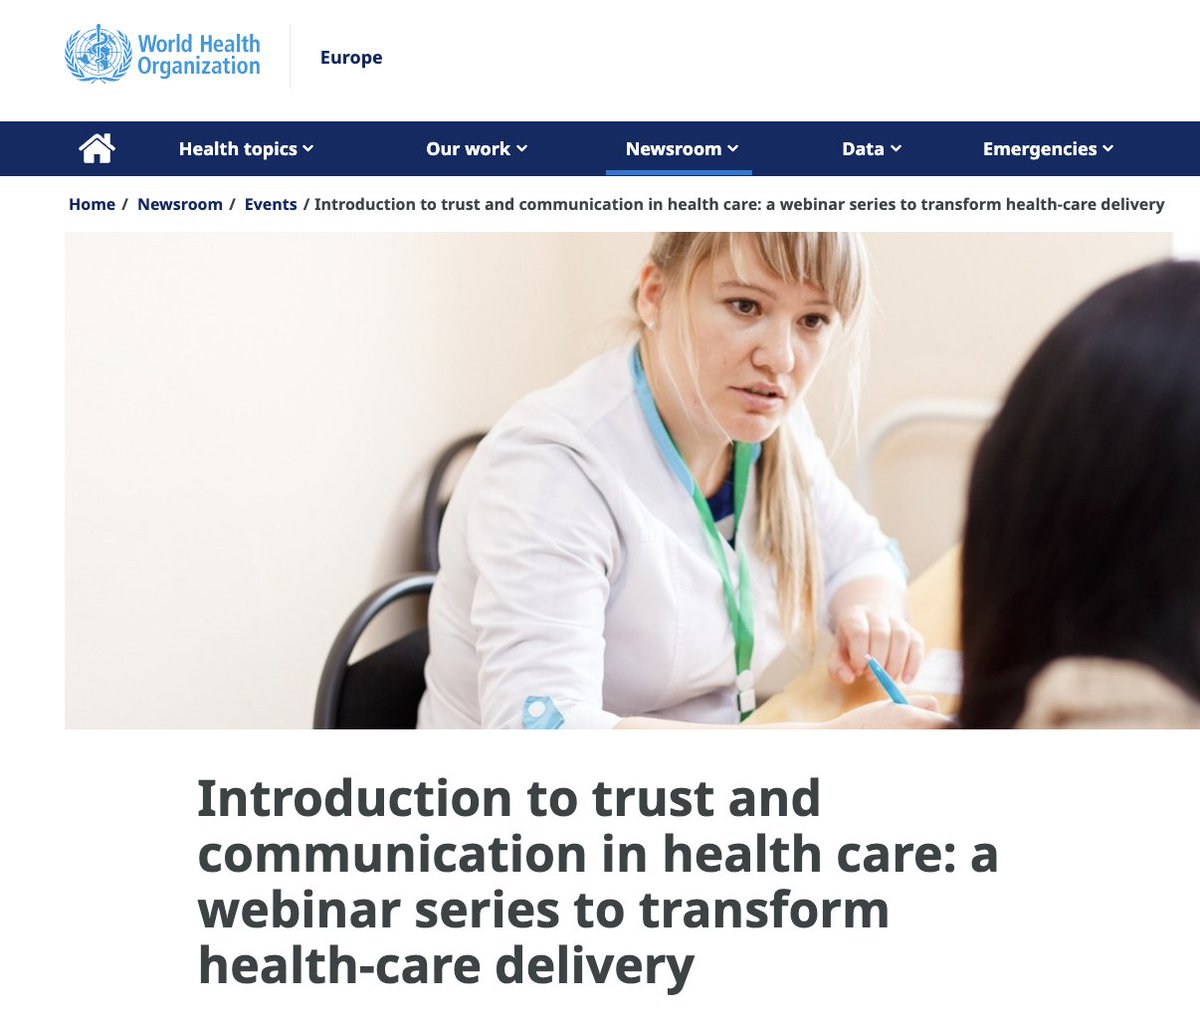 💻 Webinar: Introduction to #Trust and #Communication in health care: a webinar series to transform #Healthcare delivery 🗓️ 8 May 15:00 – 16:30 CEST with @natasha_azzmus and @JoaoBreda2 of @WHO_Europe who.int/europe/news-ro…